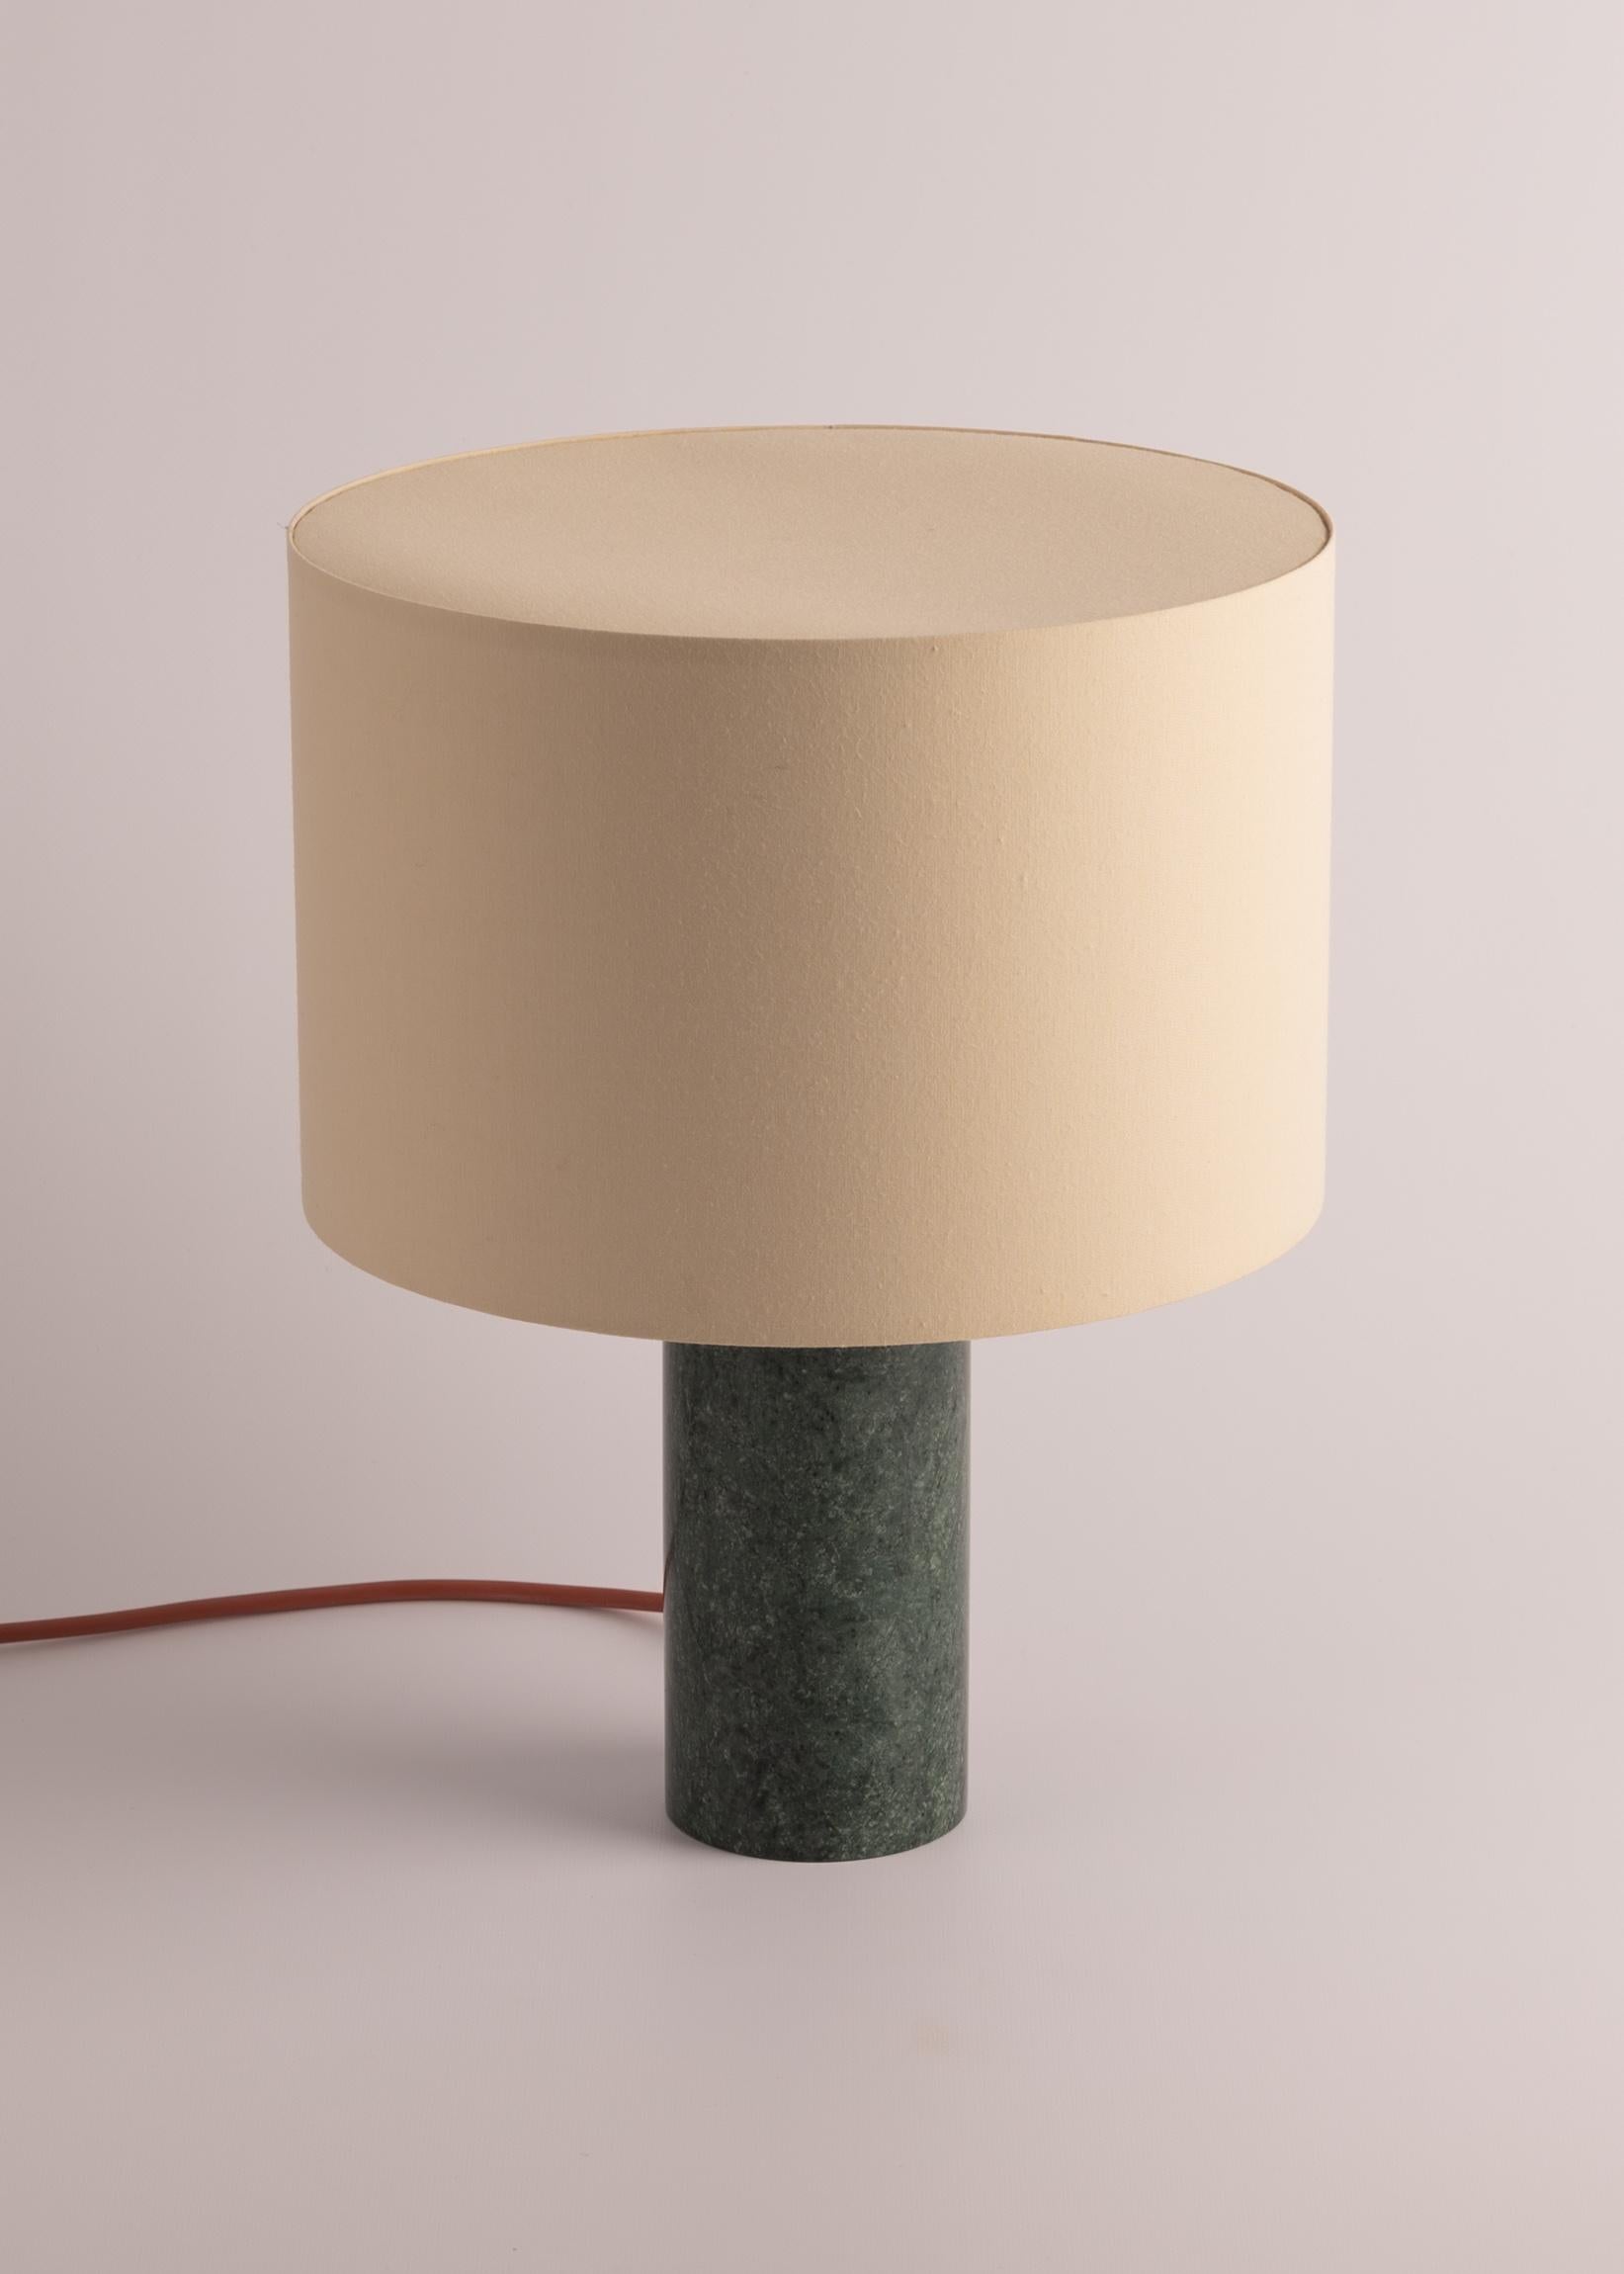 Green Marble Pipito Table Lamp by Simone & Marcel
Dimensions: Ø 30 x H 40 cm.
Materials: Cotton and green marble.

Also available in different marble and wood options and finishes. Custom options available on request. Please contact us. 

All our